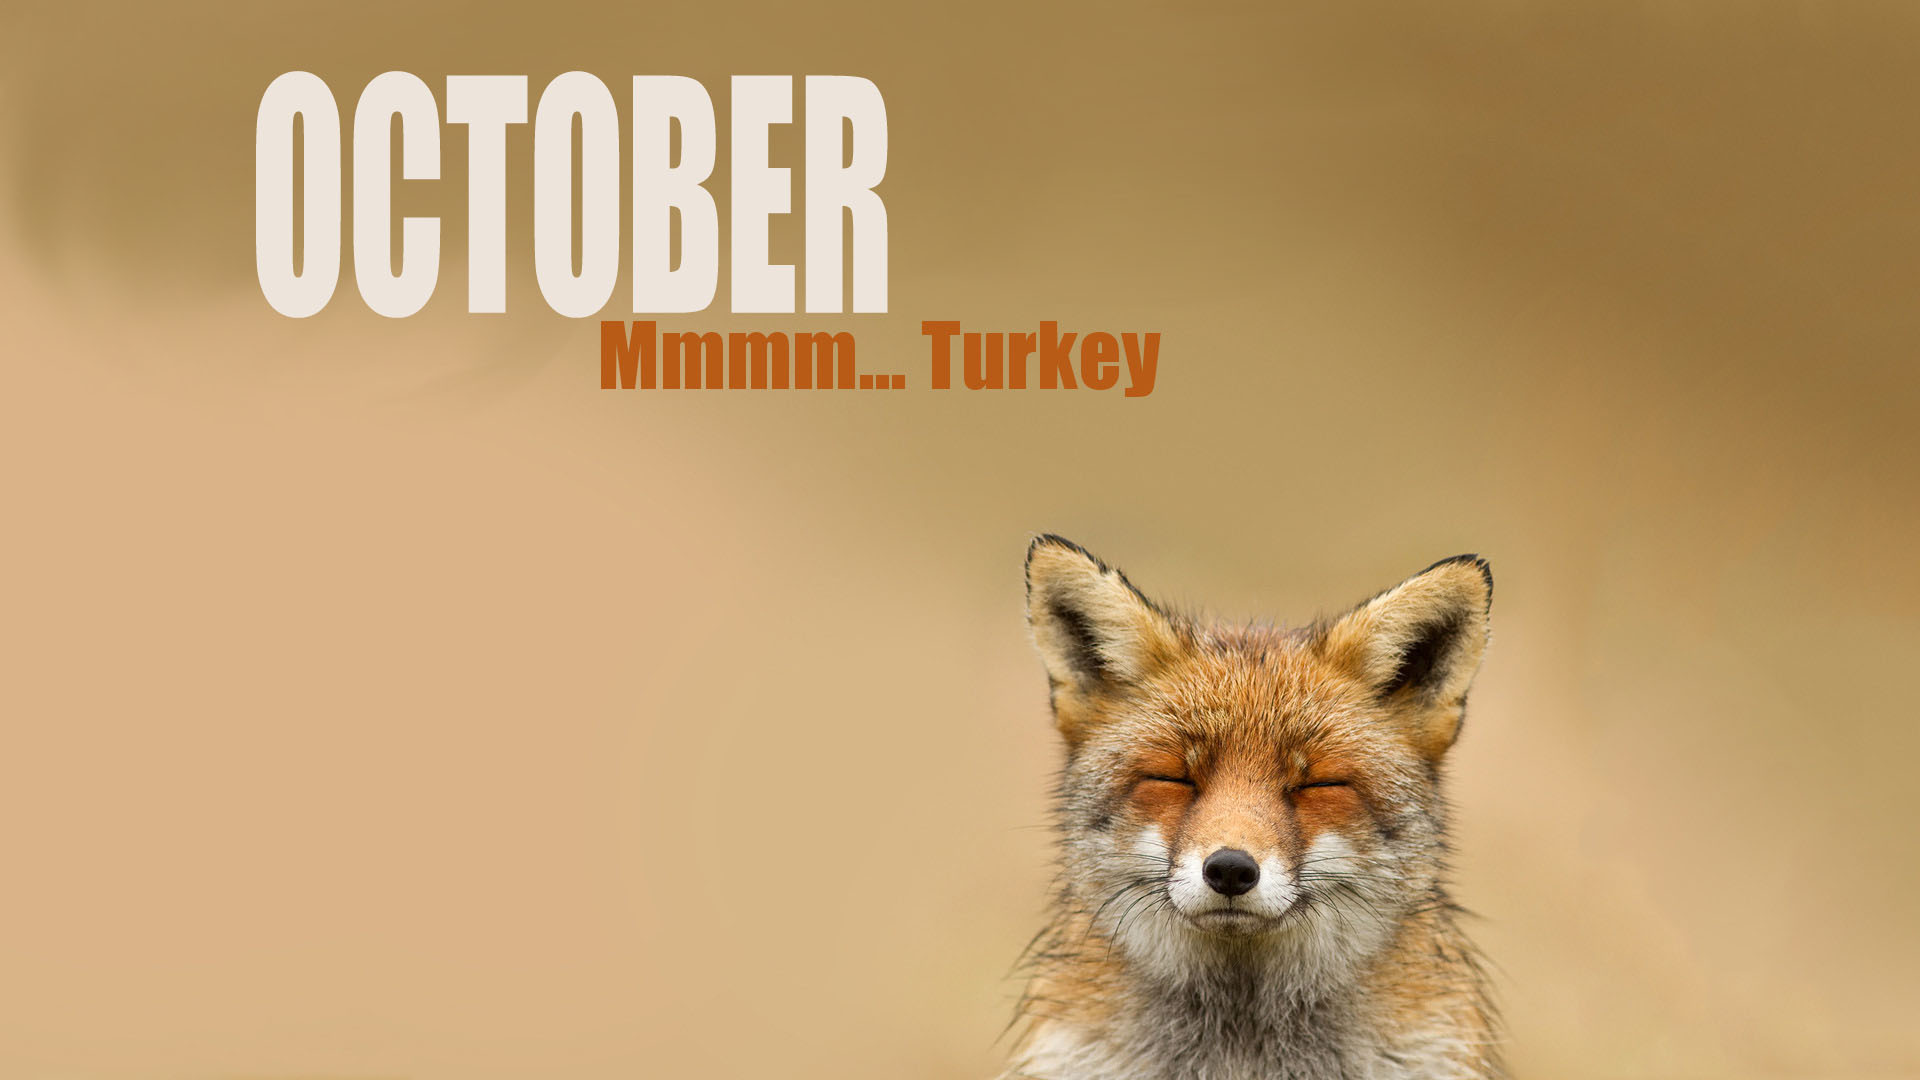 General 1920x1080 October month fox animals typography simple background mammals